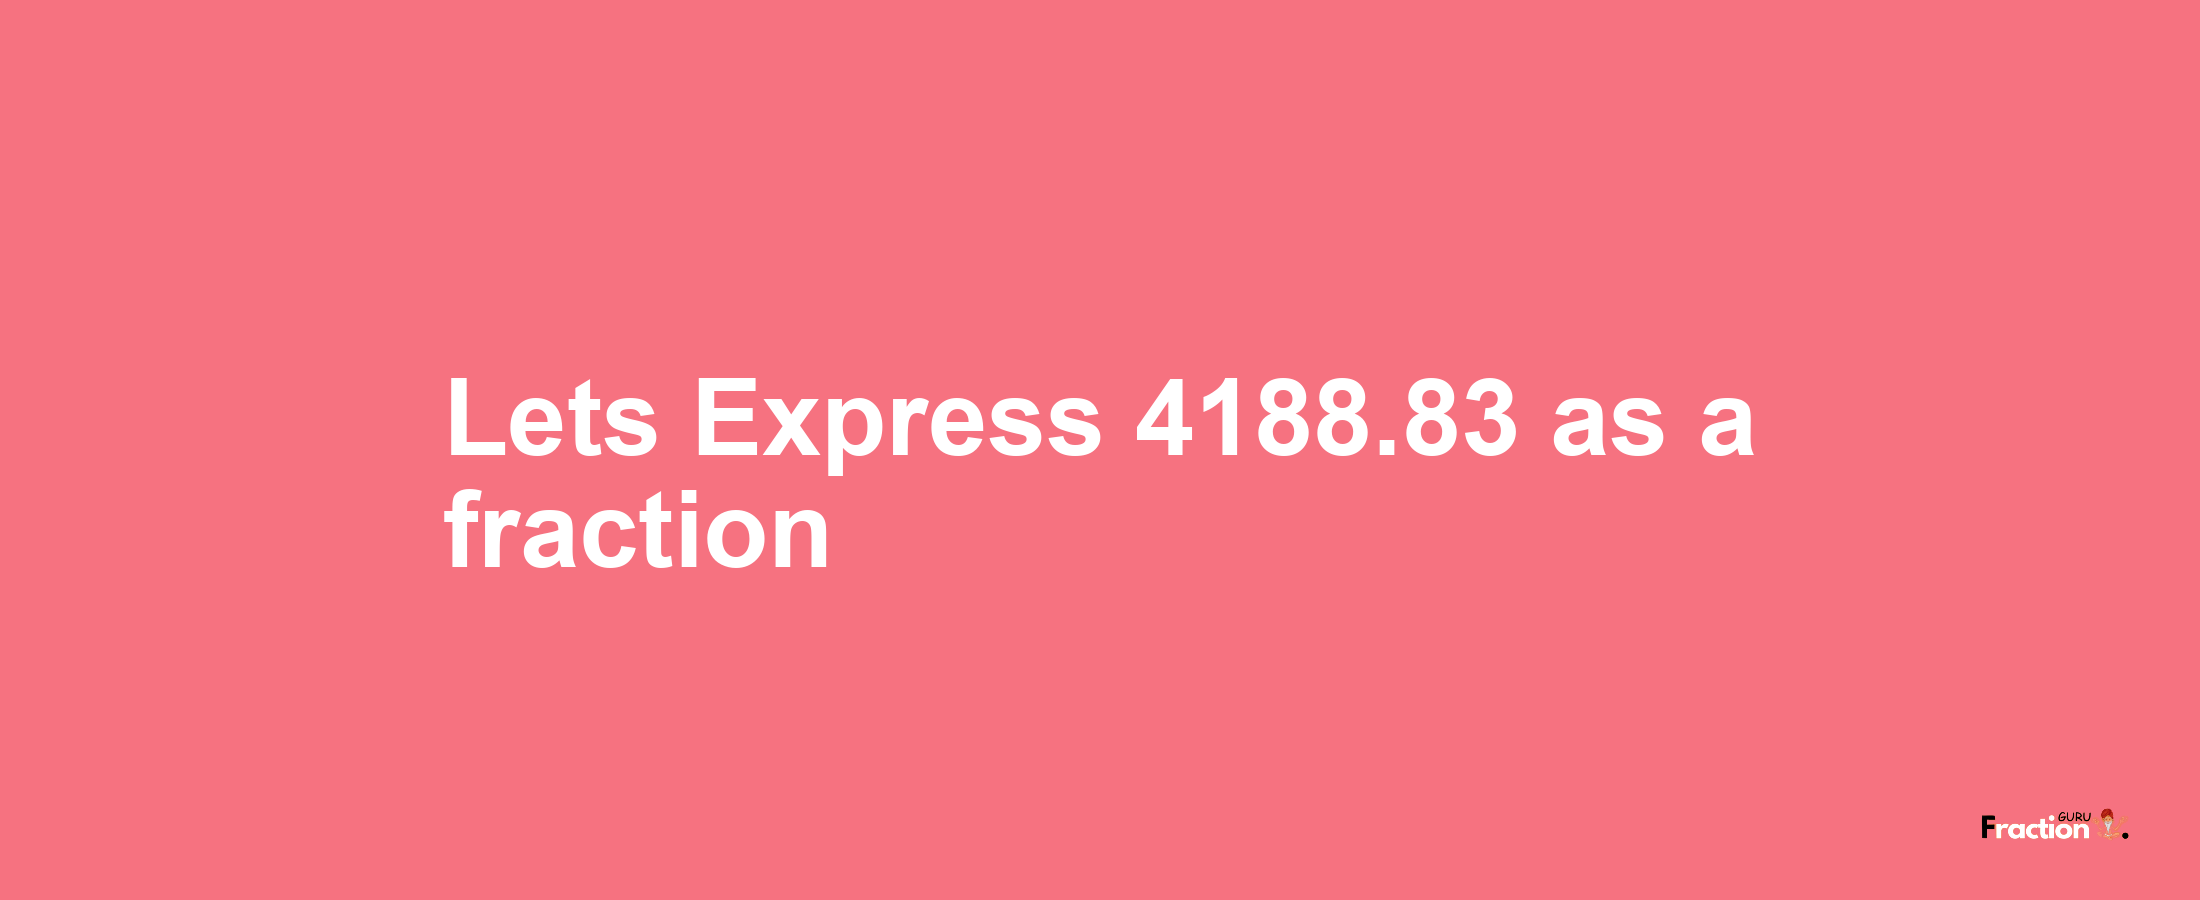 Lets Express 4188.83 as afraction